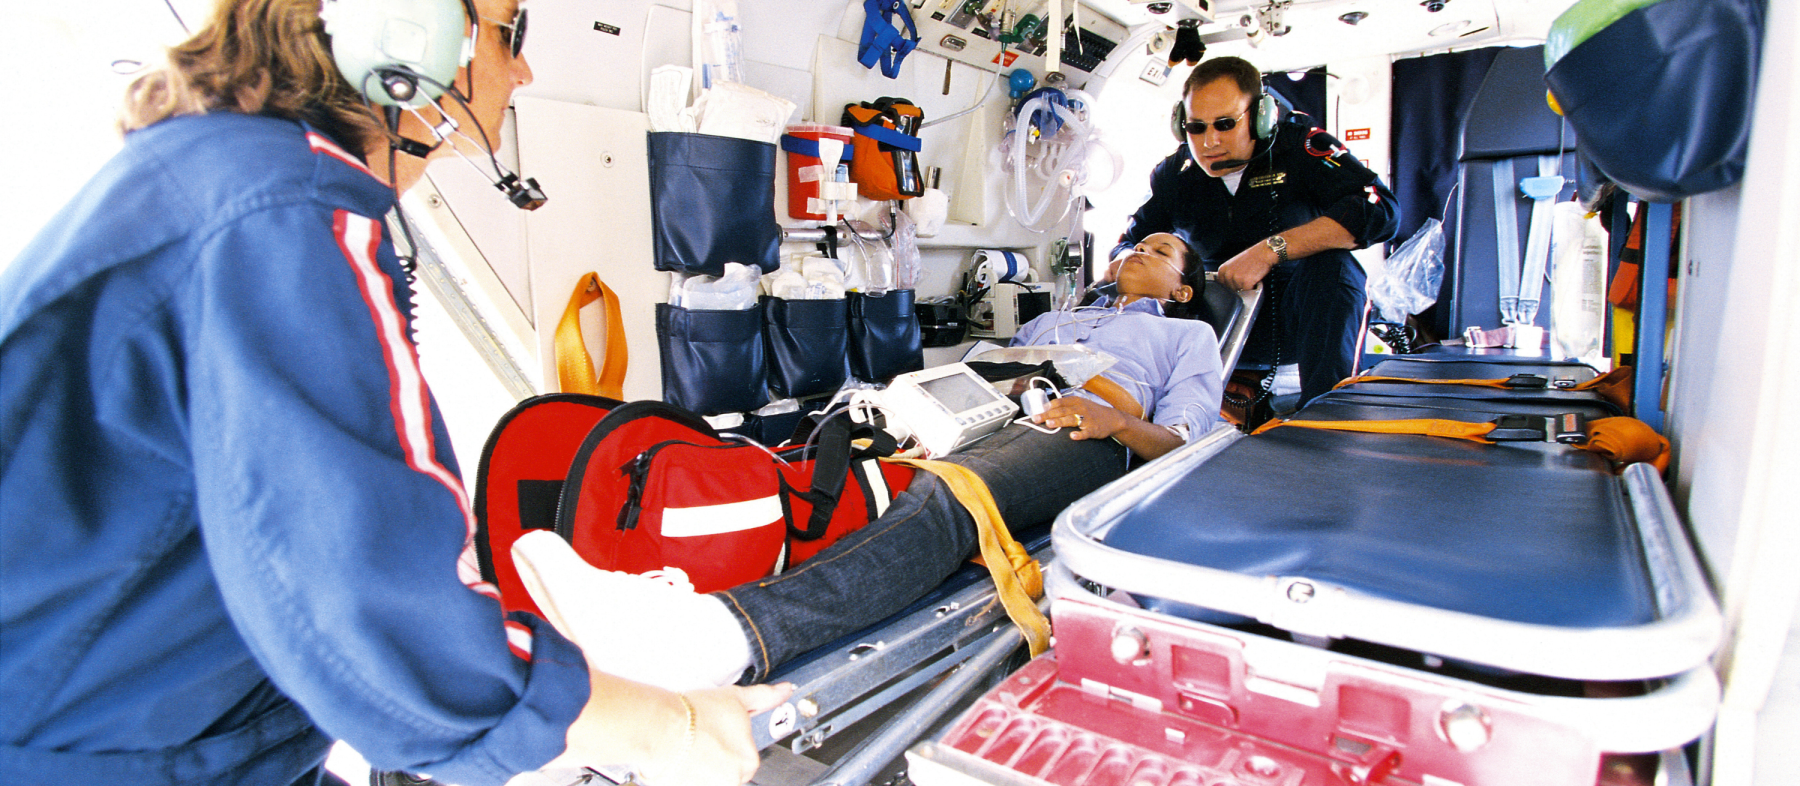 EMTs pull a patient into the ambulance